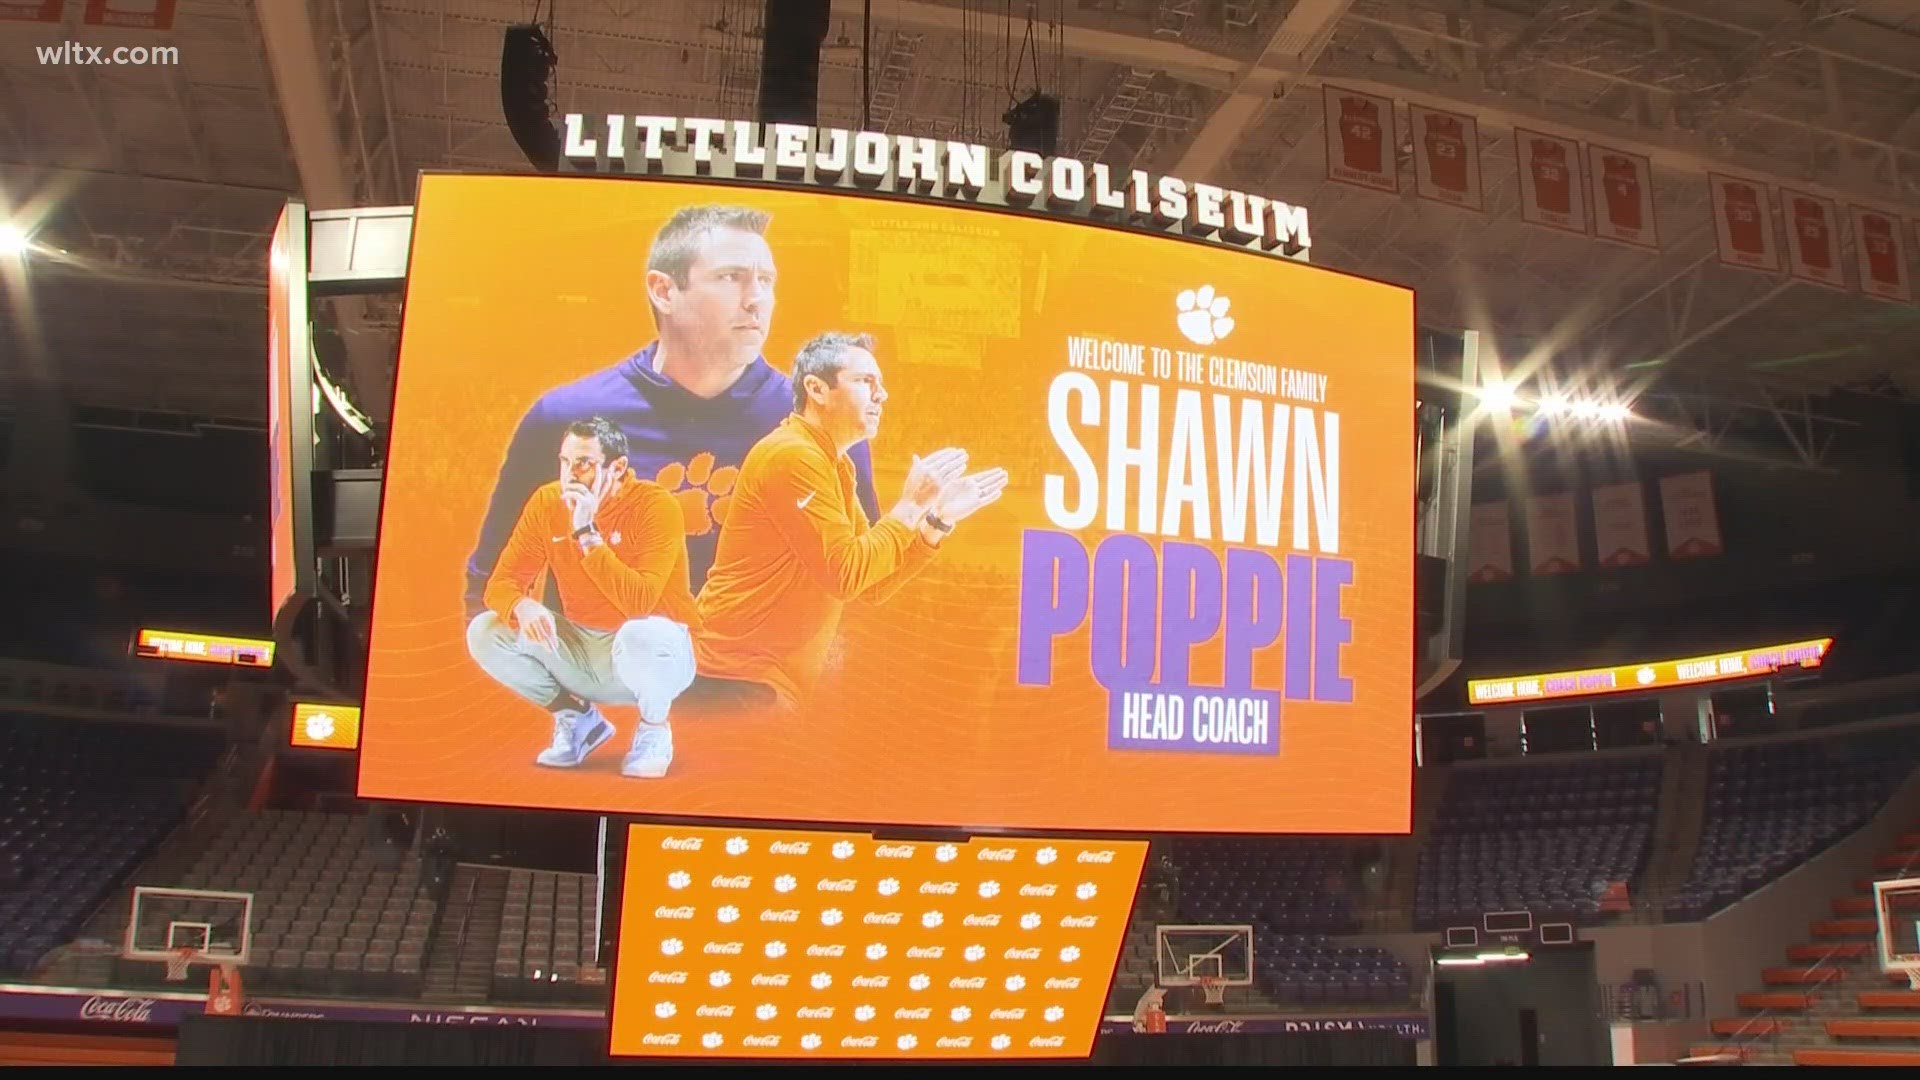 Shawn Poppie has been hired to bring the Clemson women's basketball program back to being relevant on a national scale